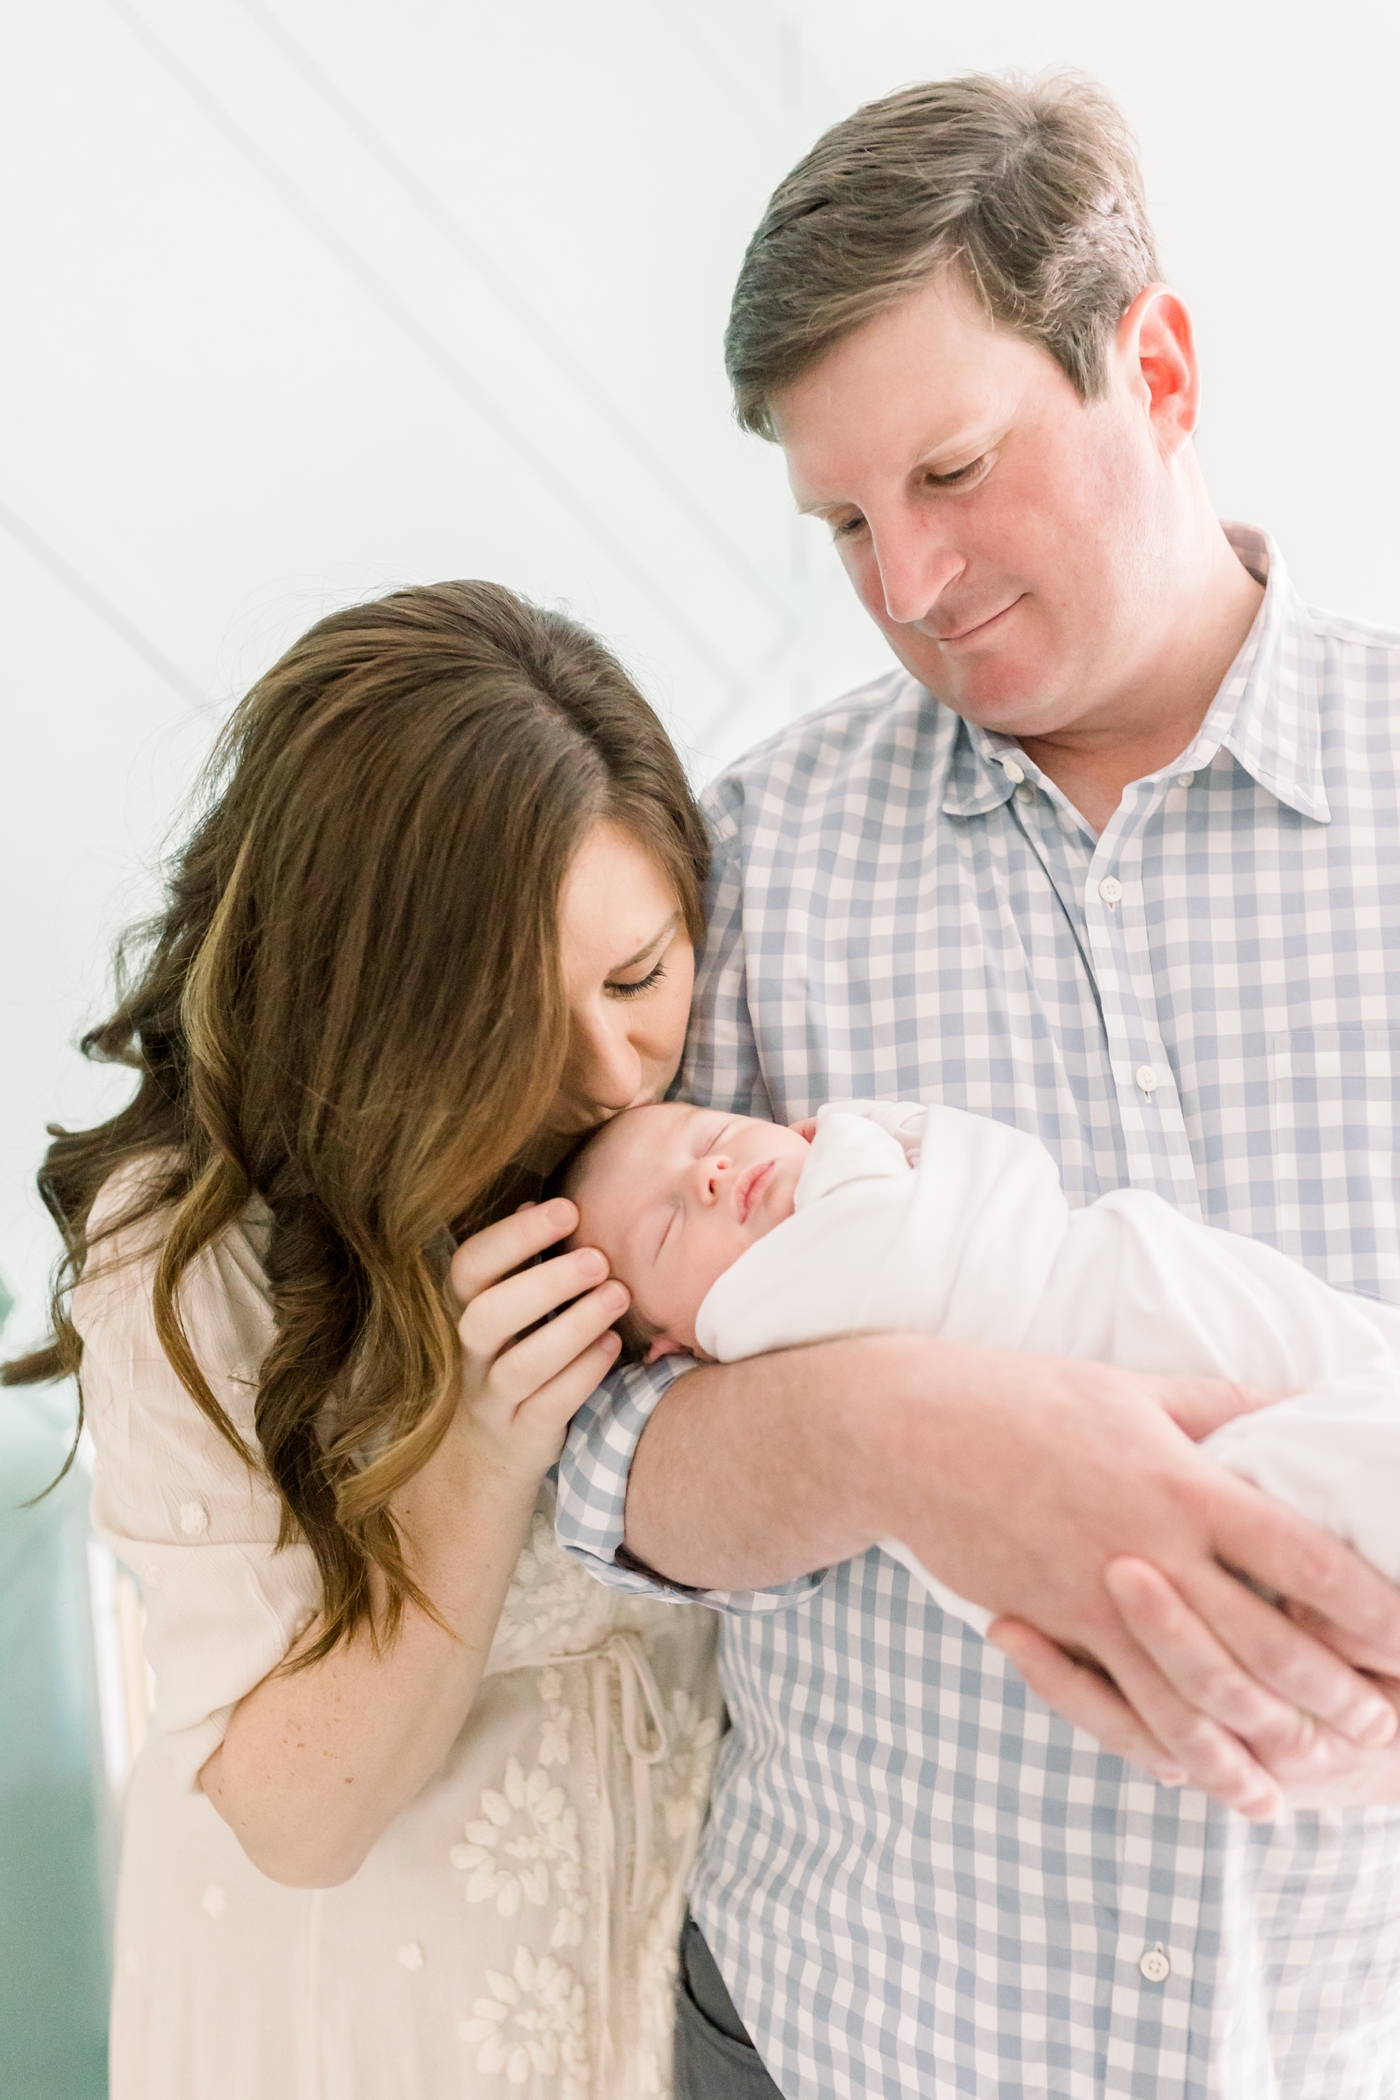 Mom kissing newborn baby held by dad | Photo by Caitlyn Motycka Photography.